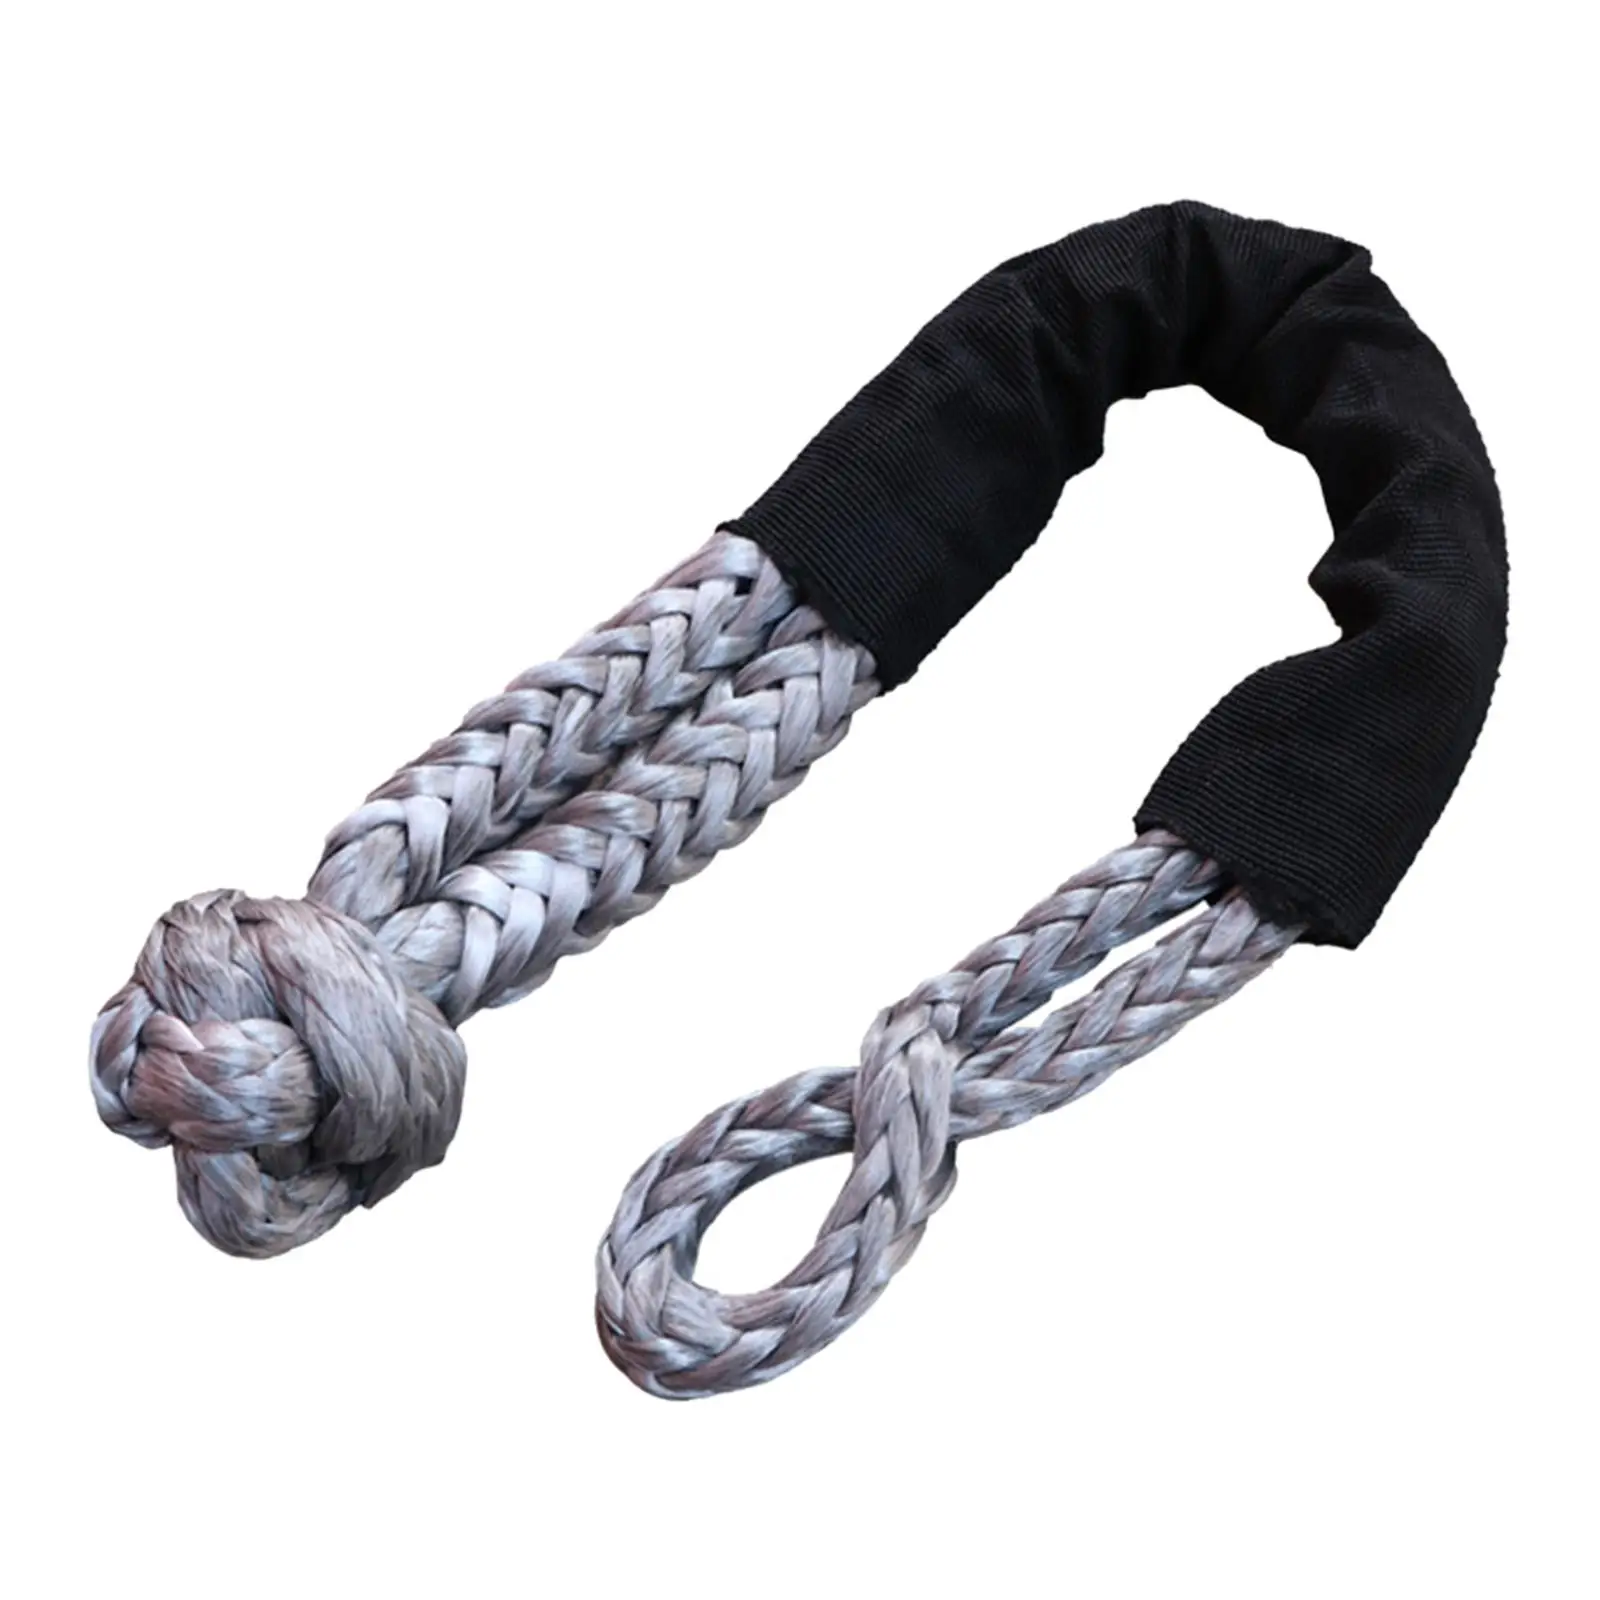 Soft Shackle Durable Protective Sleeve Towing Rope Strong Breaking Strength for ATV UTV SUV Towing Winches Sailing